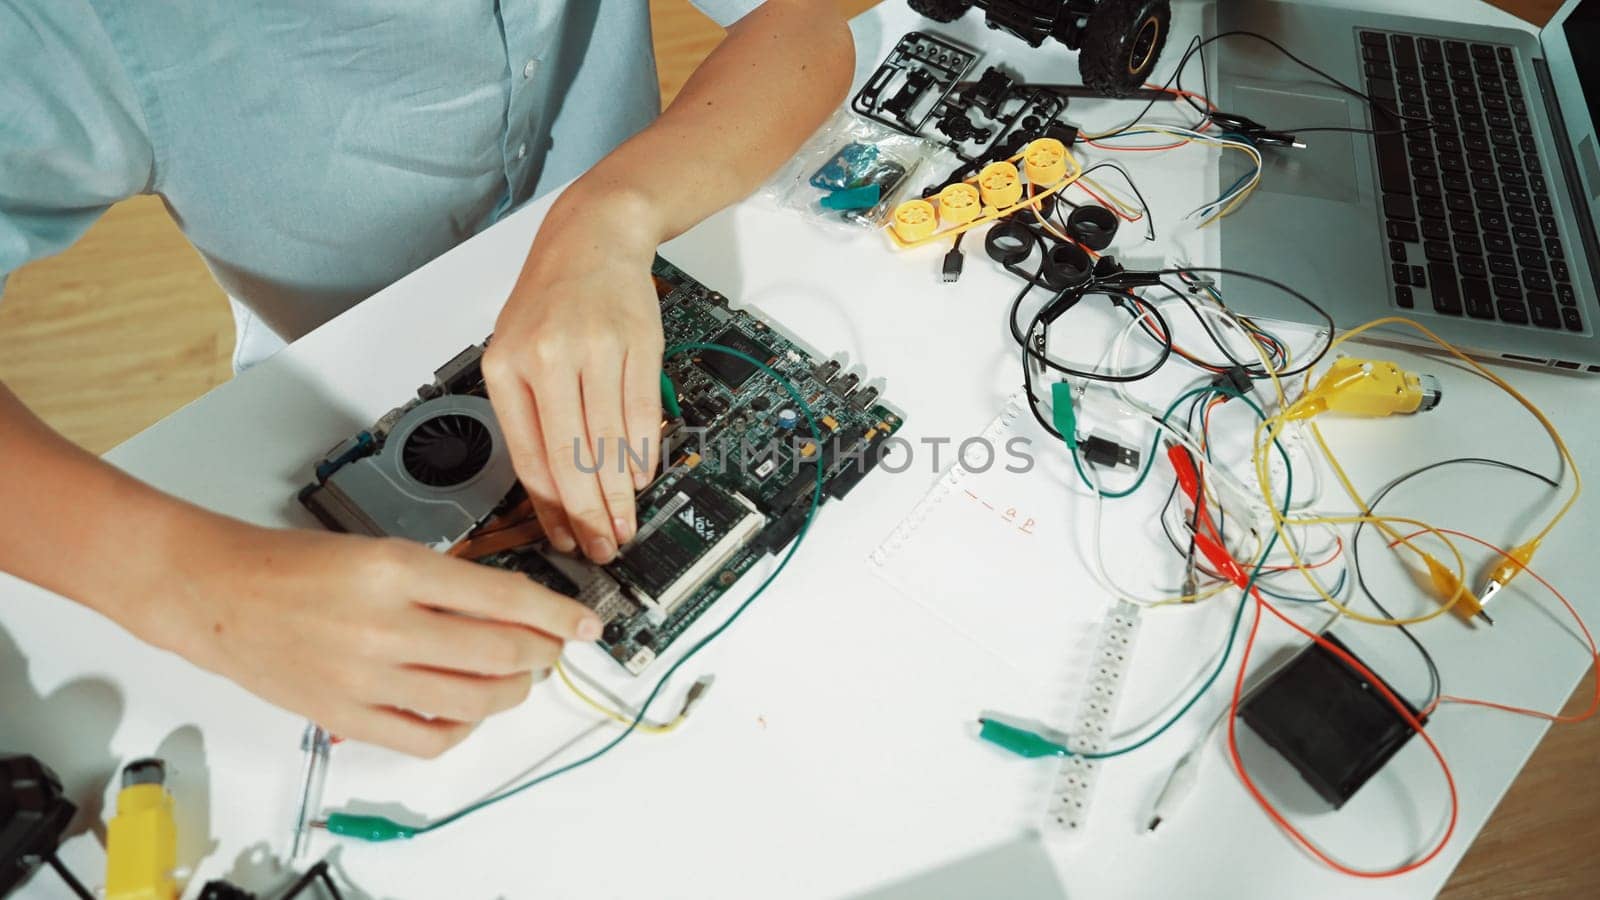 Closeup of boy fixing motherboard with electronic tool on table. Edification. by biancoblue